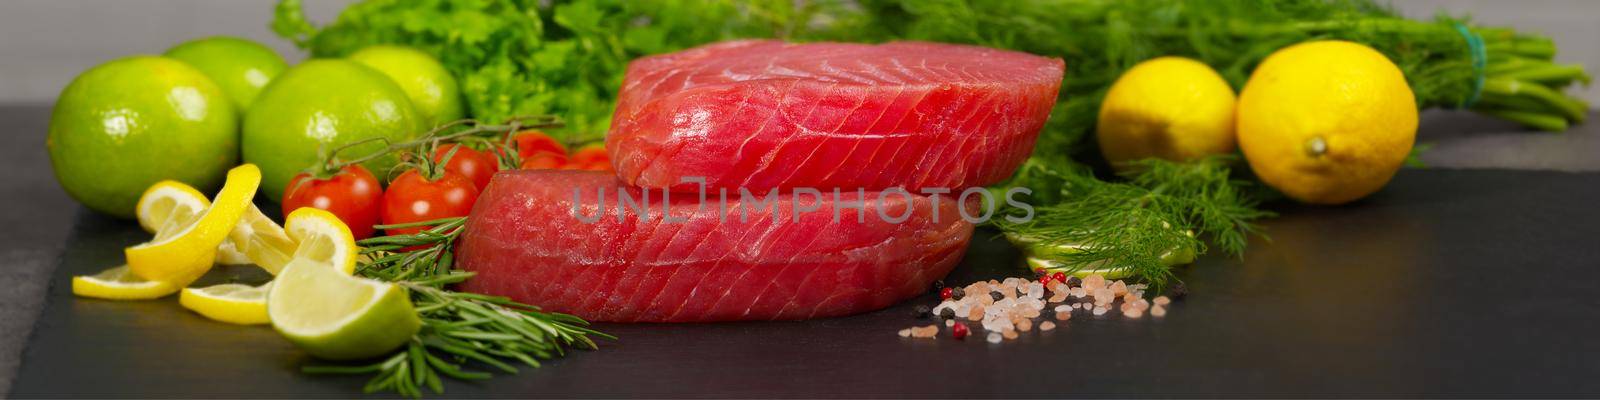 Tuna raw Steak, tuna sashimi, tuna fish sliced with vegetables. healthy eating with seafood, we cook at home. fish meat layout on black stone by PhotoTime